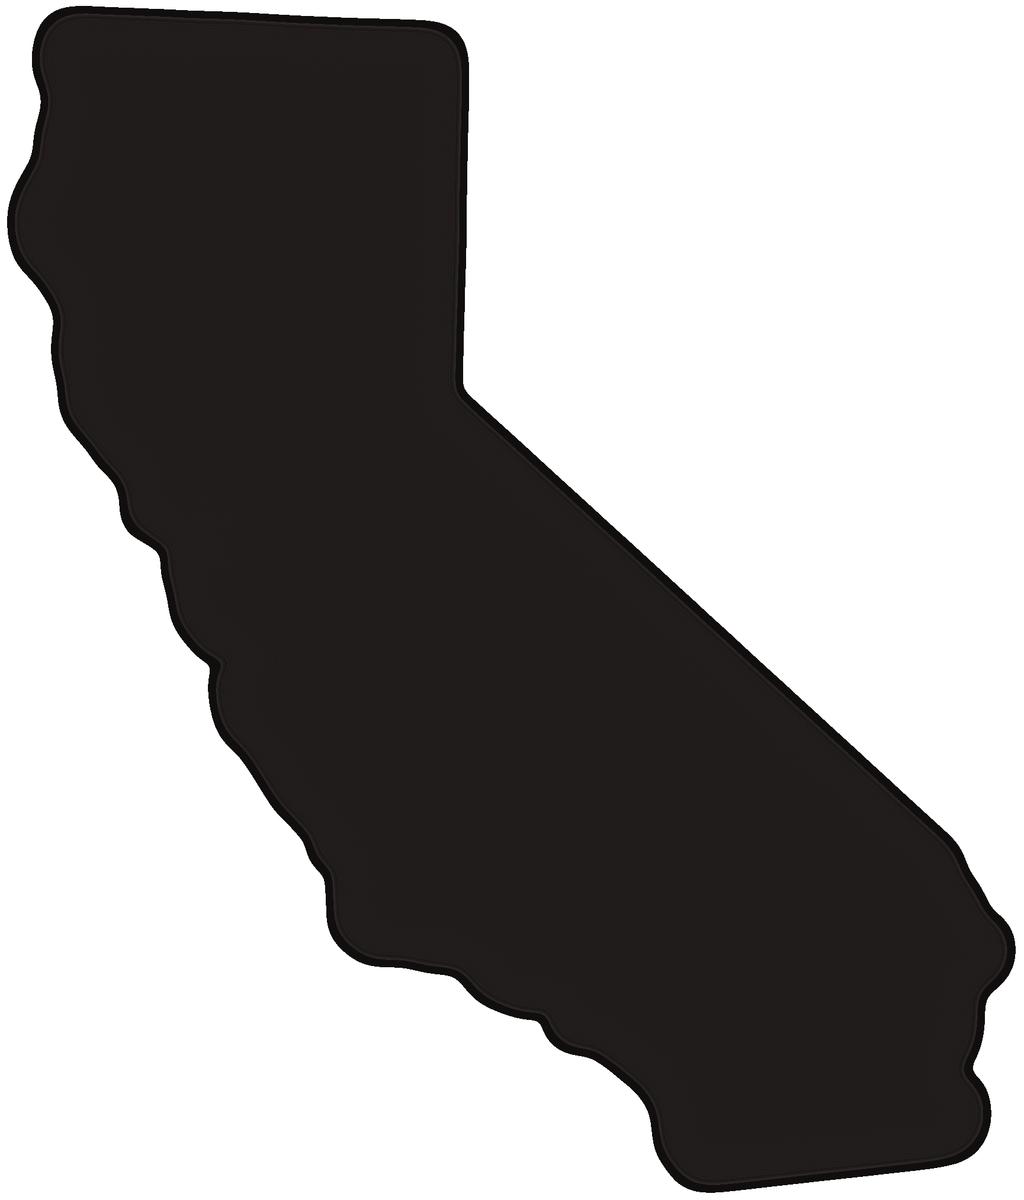 Number and Percent of Low-Wage Workers in California, 2014 One of every three California workers earns low wages 33